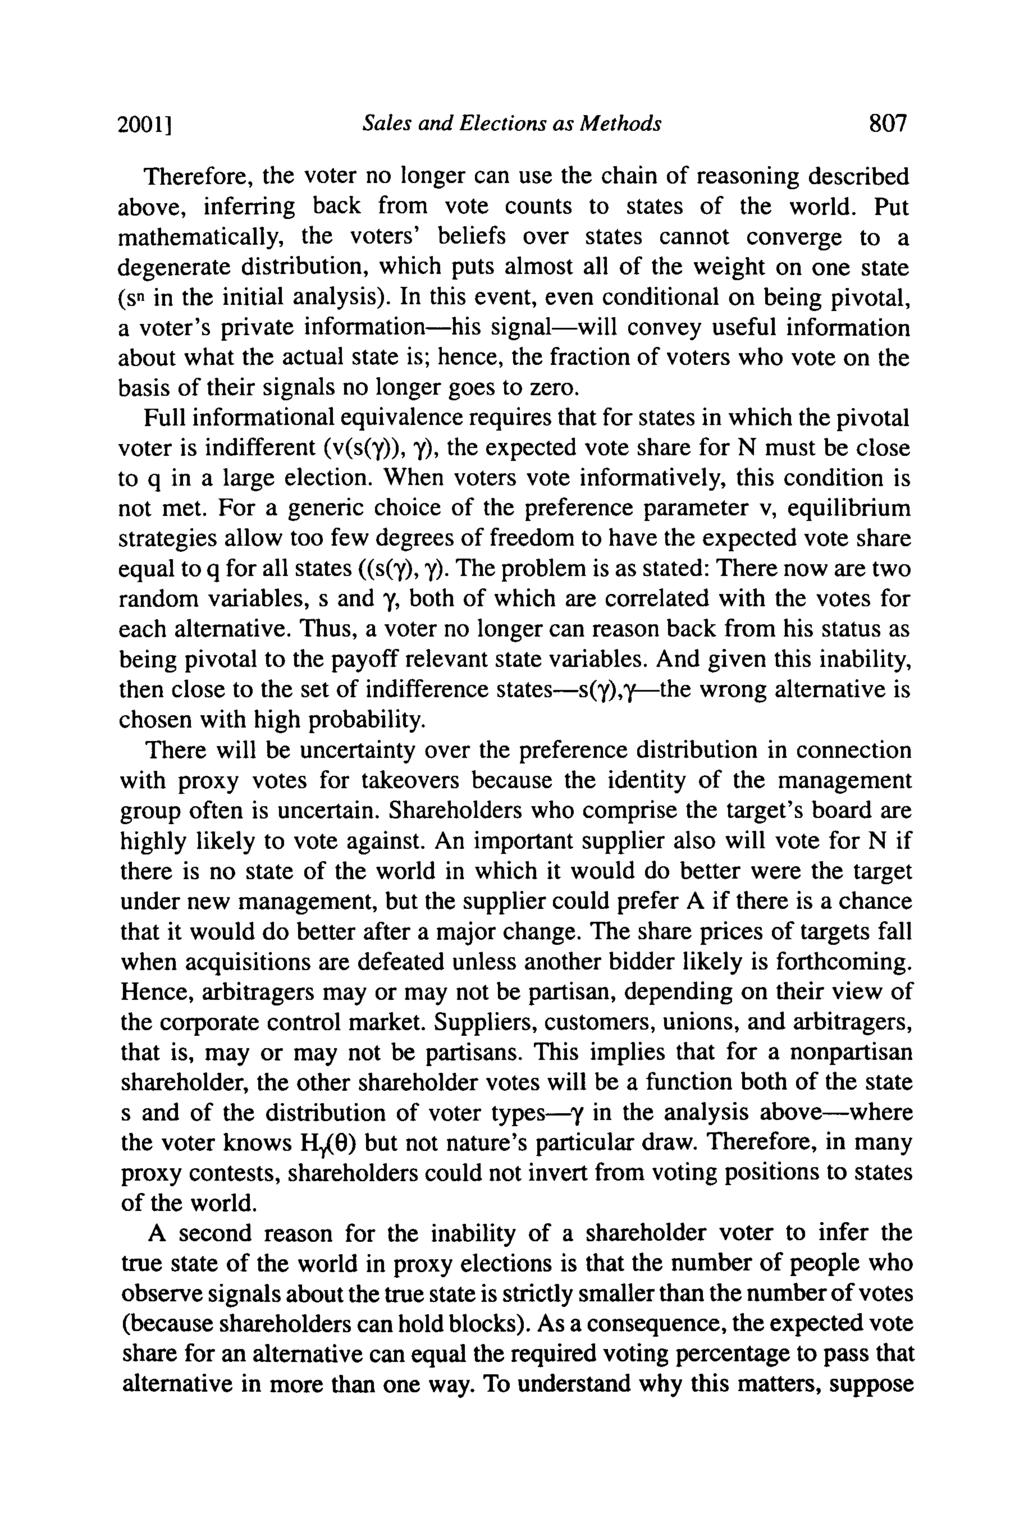 2001] Sales and Elections as Methods Therefore, the voter no longer can use the chain of reasoning described above, inferring back from vote counts to states of the world.